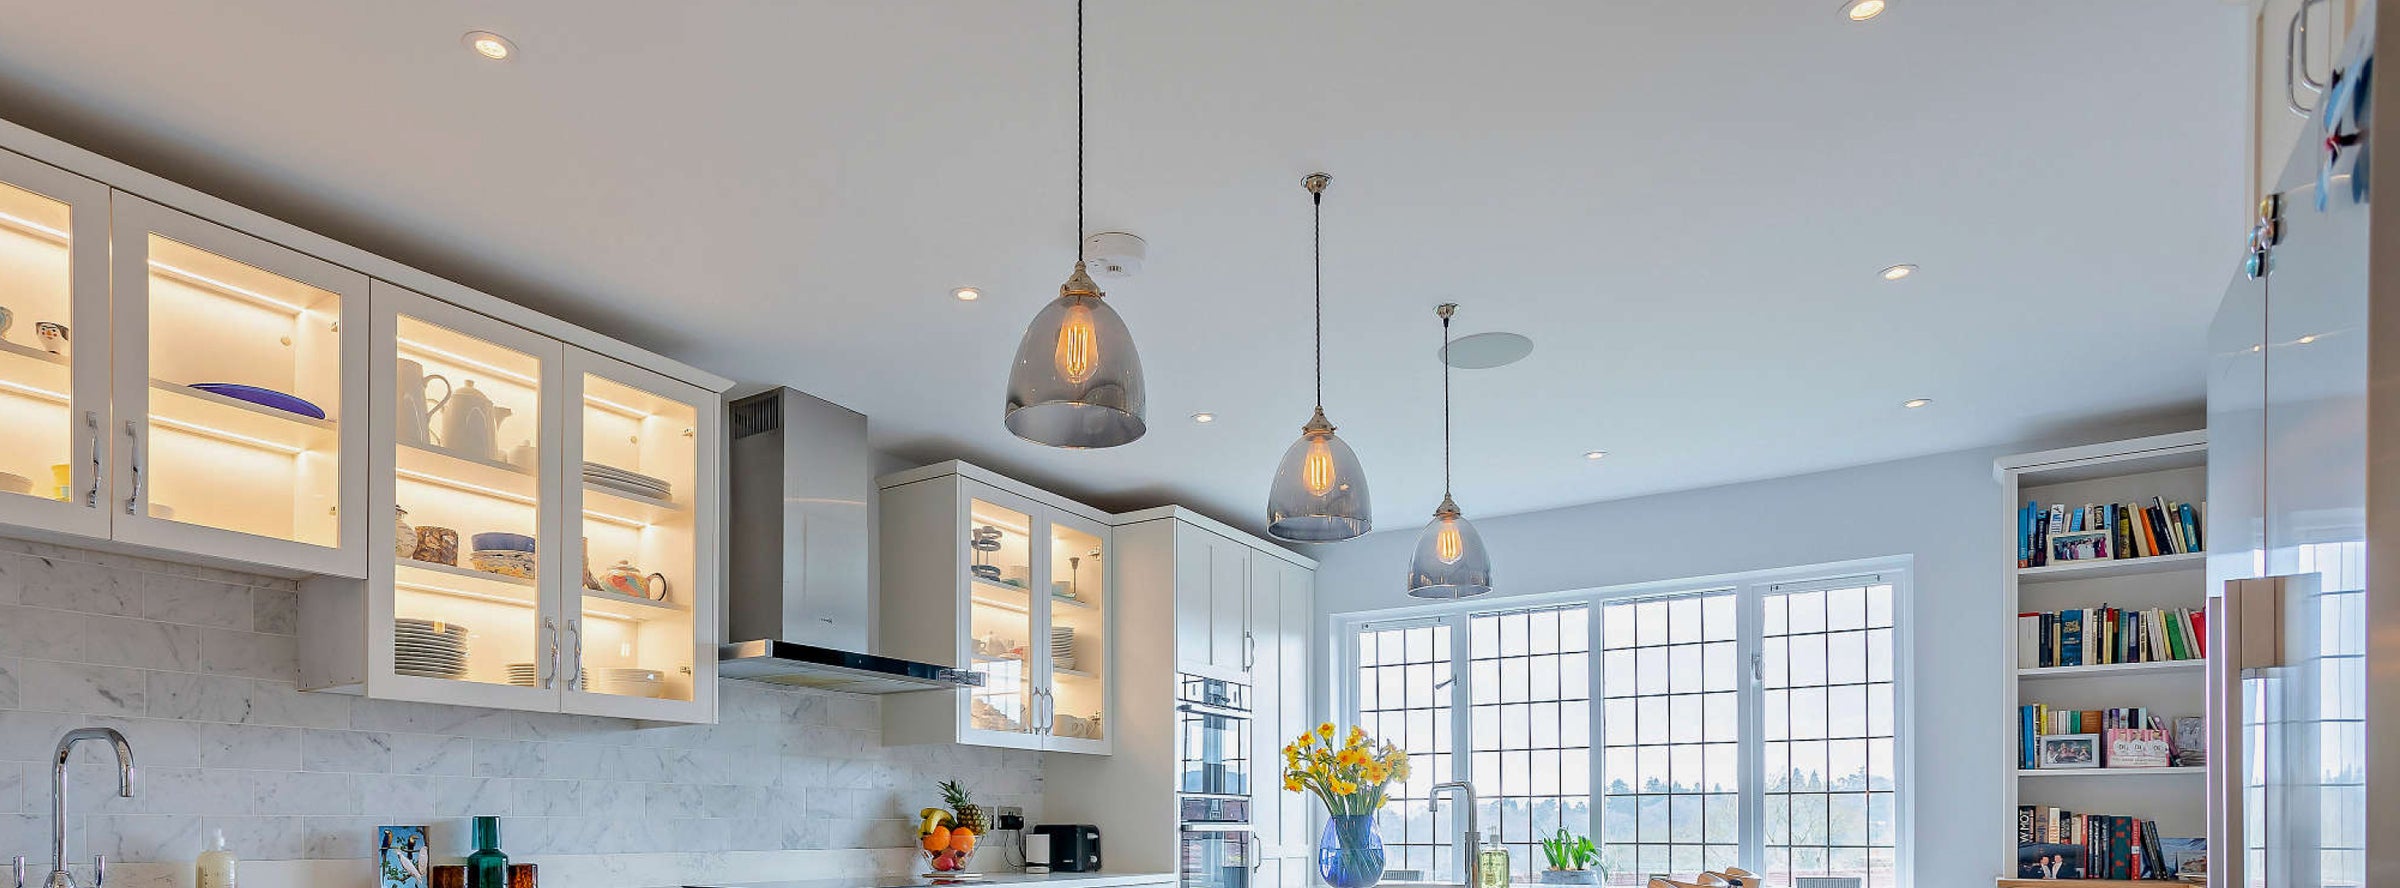 Image showing pendant lights in a kitchen